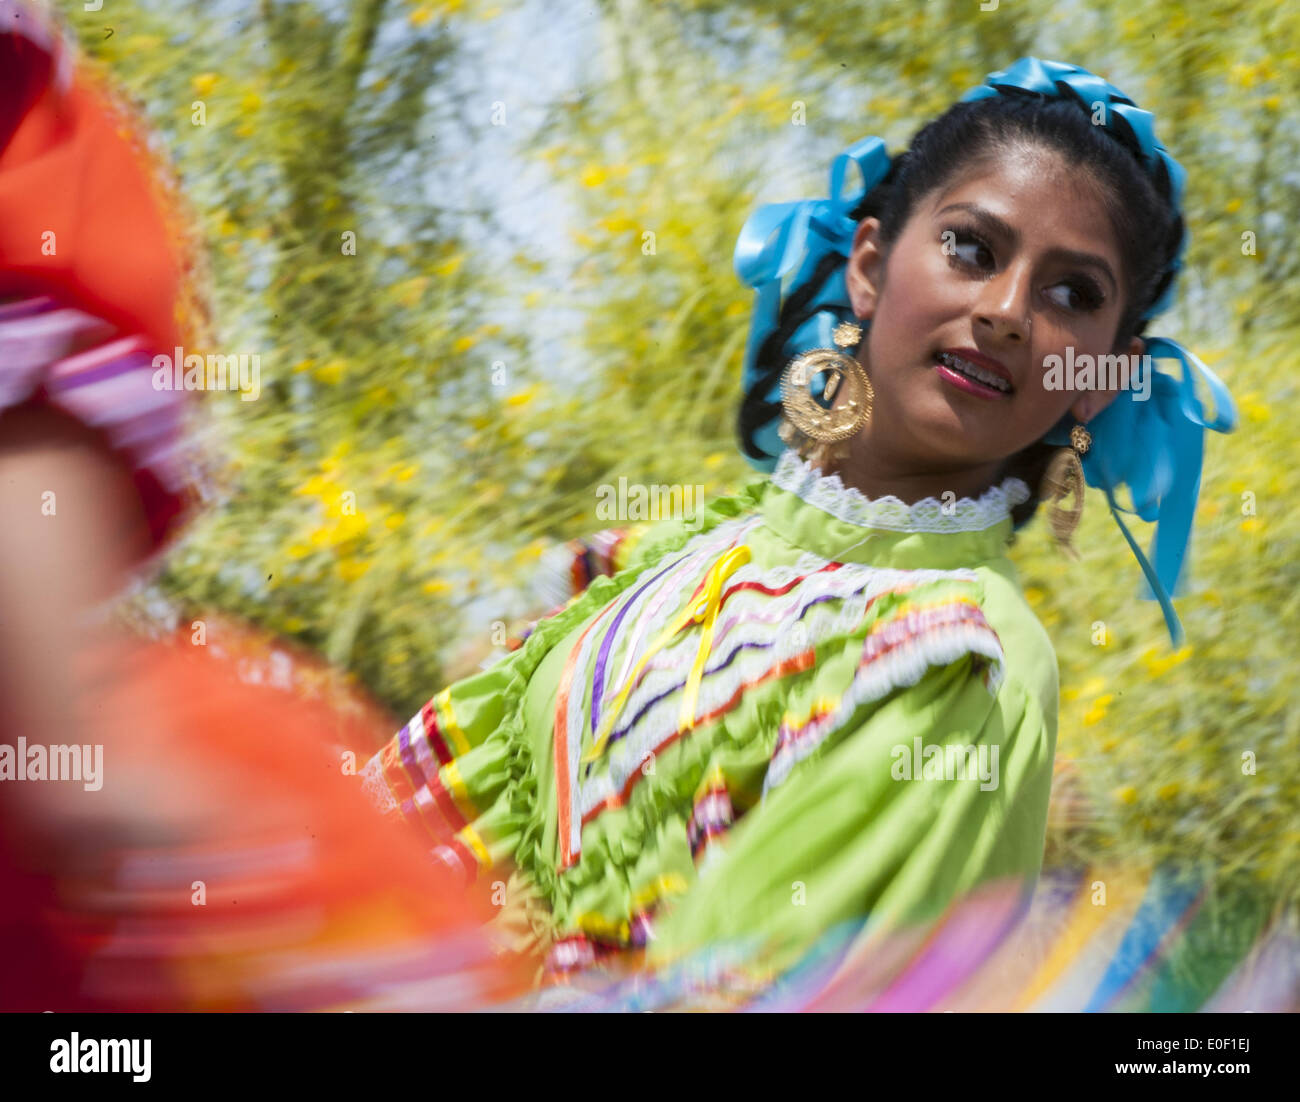 San Juan Capistrano, California, USA. 10th May, 2014. Dancers with the Ballet Folklorico de San Juan Capistrano performed various regional dances on Saturday at the 10th Annual 2014 Battle of the Mariachi at Mission San Juan Capistrano in San Juan Capistrano. The 10th Annual 2014 Battle of the Mariachi kicked off at Mission San Juan Capistrano in San San Juan Capistrano on Saturday, featuring Mariachis from around Southern California competing for top honors and prizes***ALT CAPTION****Mission San Juan Capistrano hosted the 10th Annual 2014 Battle of the Mariachis on Saturday in San Juan Capi Stock Photo